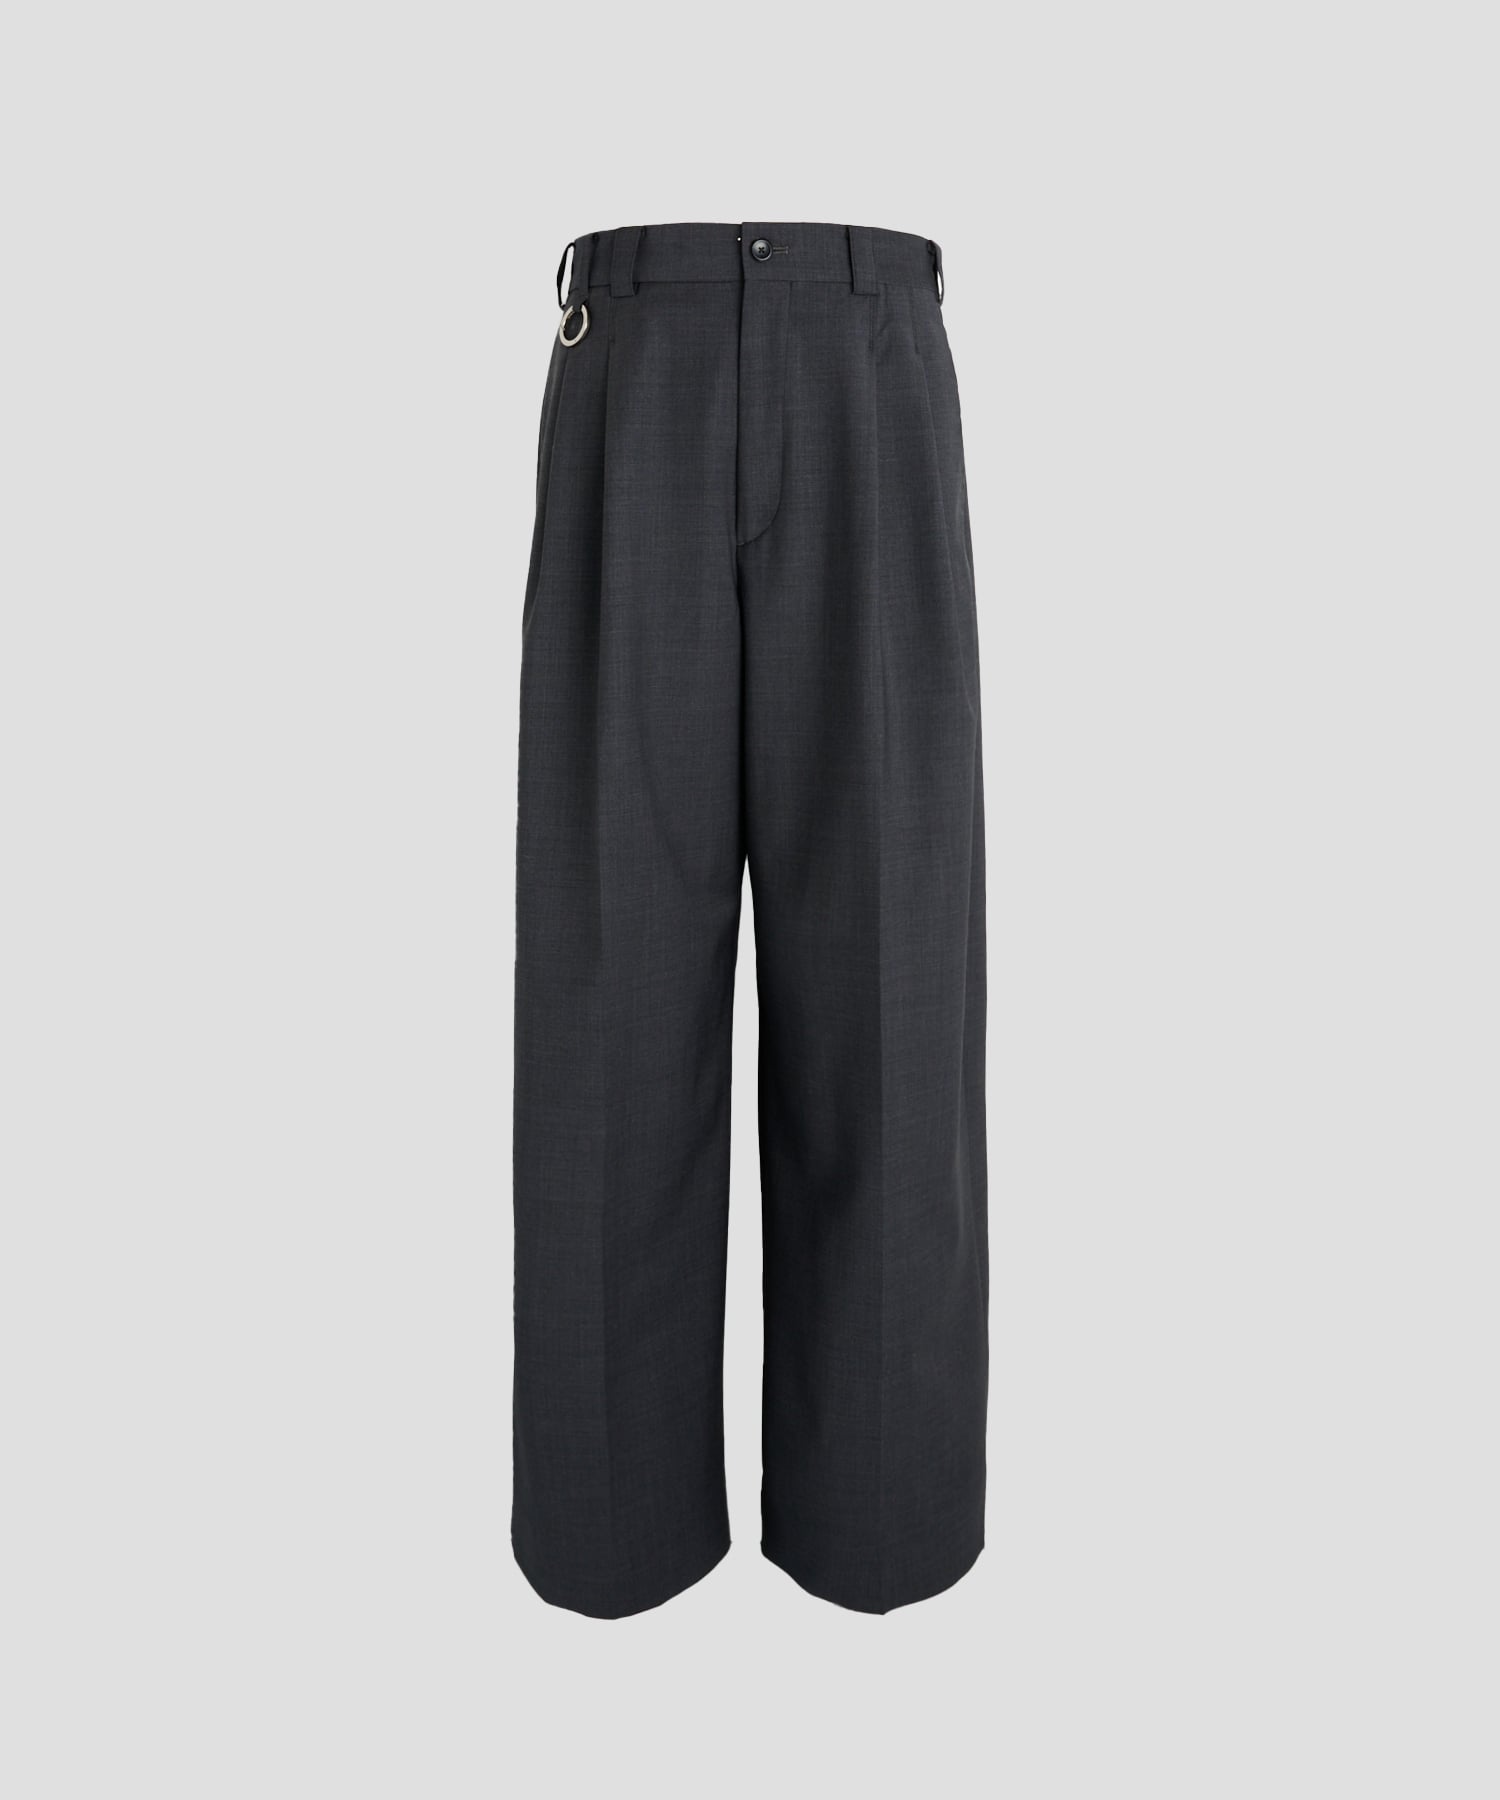 Extra Volumed Tapered Pants